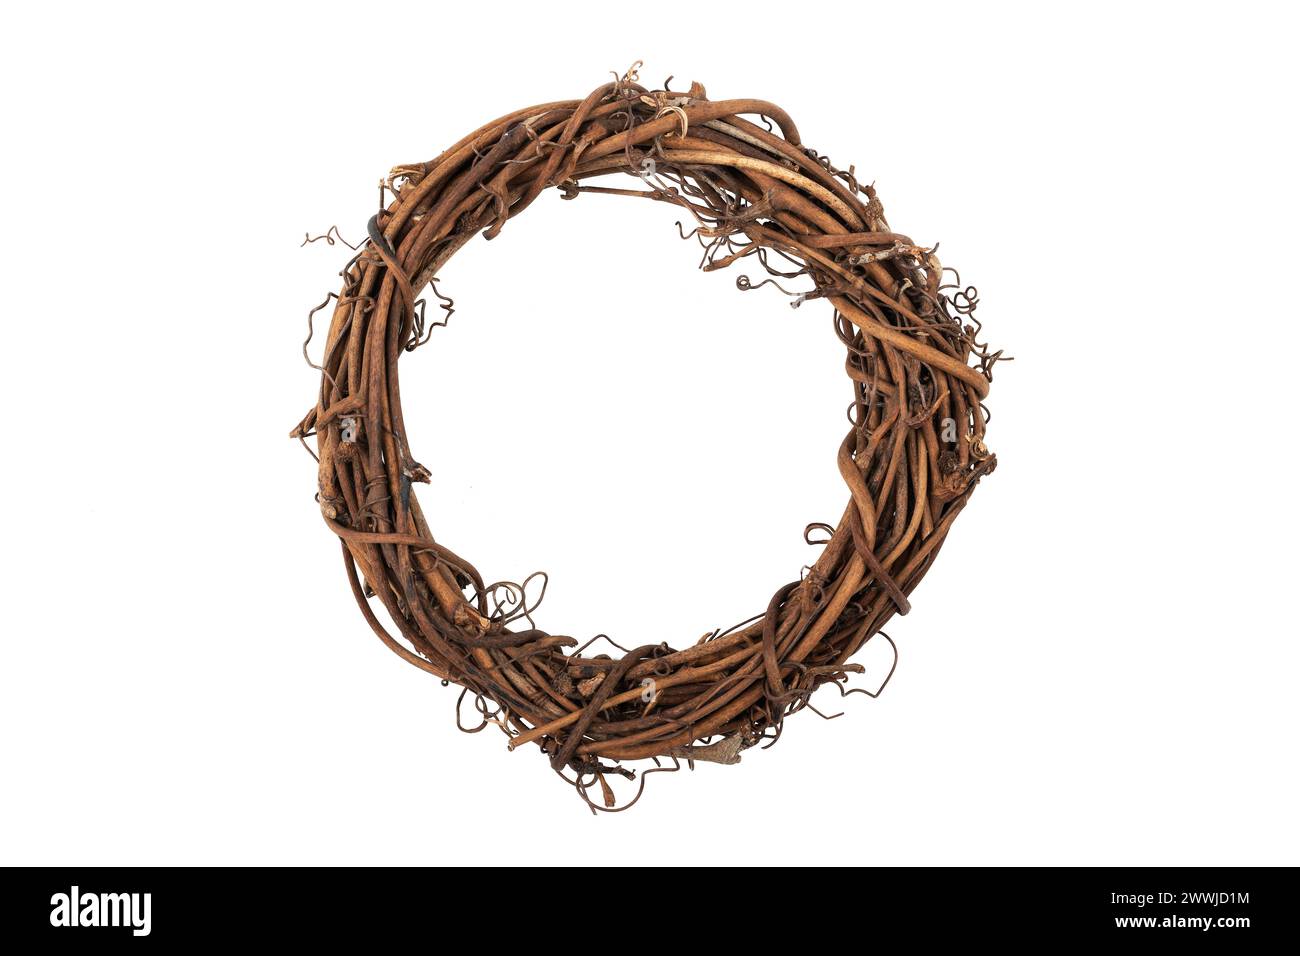 Wreath of vines in the shape of a circle on white background. Top view Stock Photo